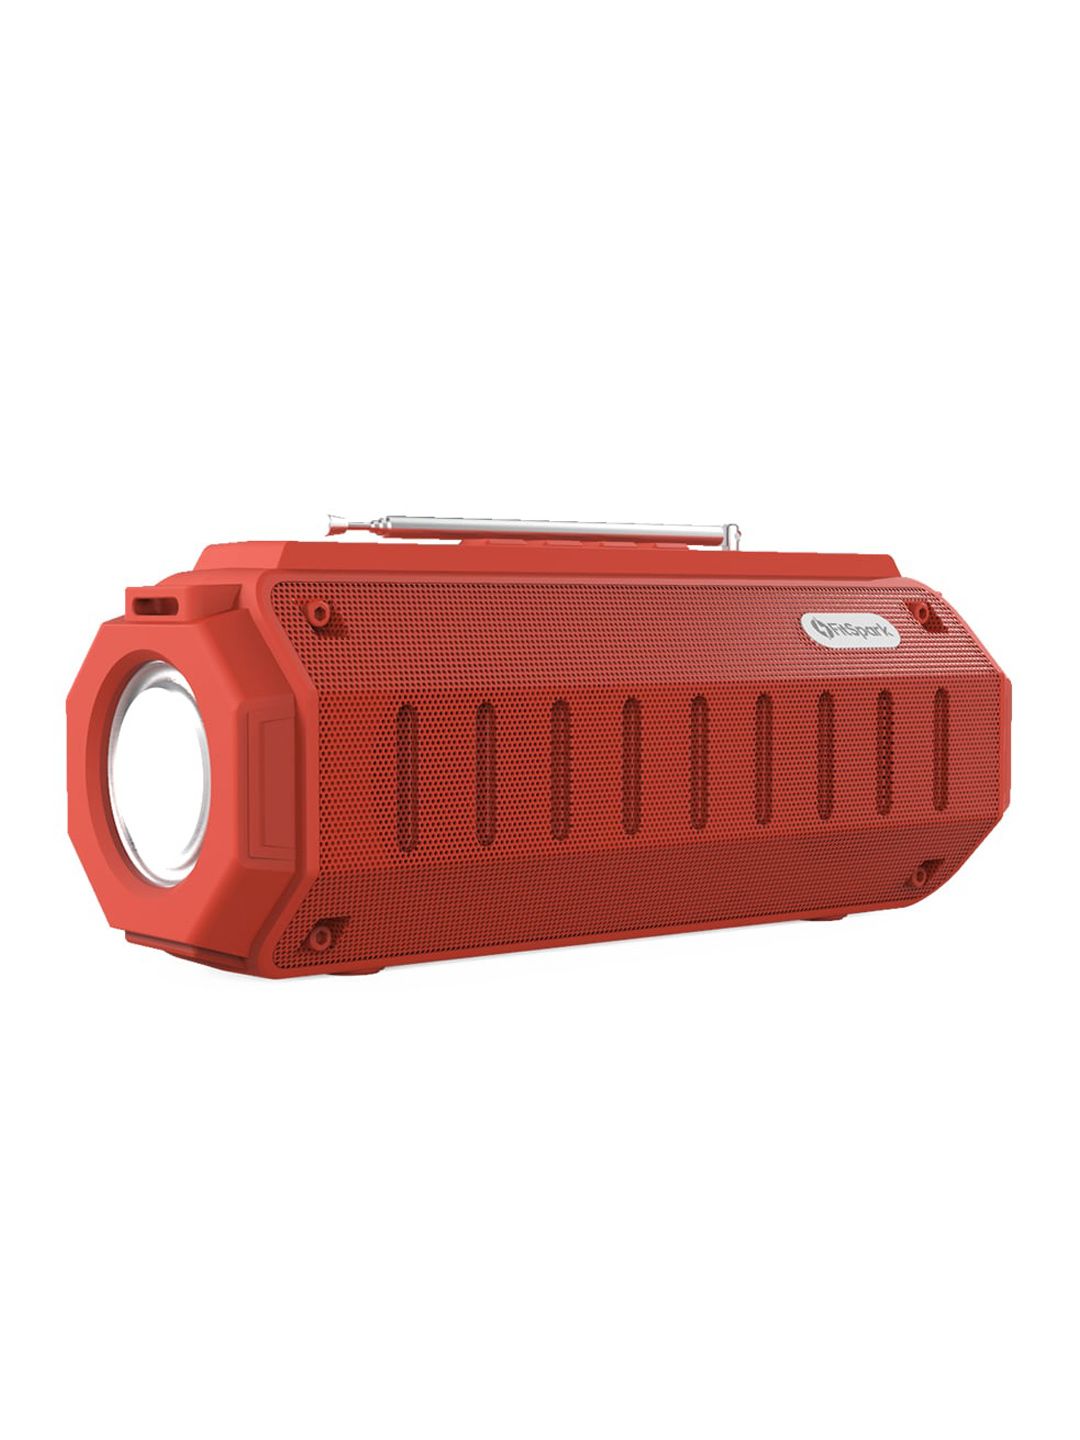 FitSpark Red DHUN Portable Wireless Speaker with LED Lights Price in India